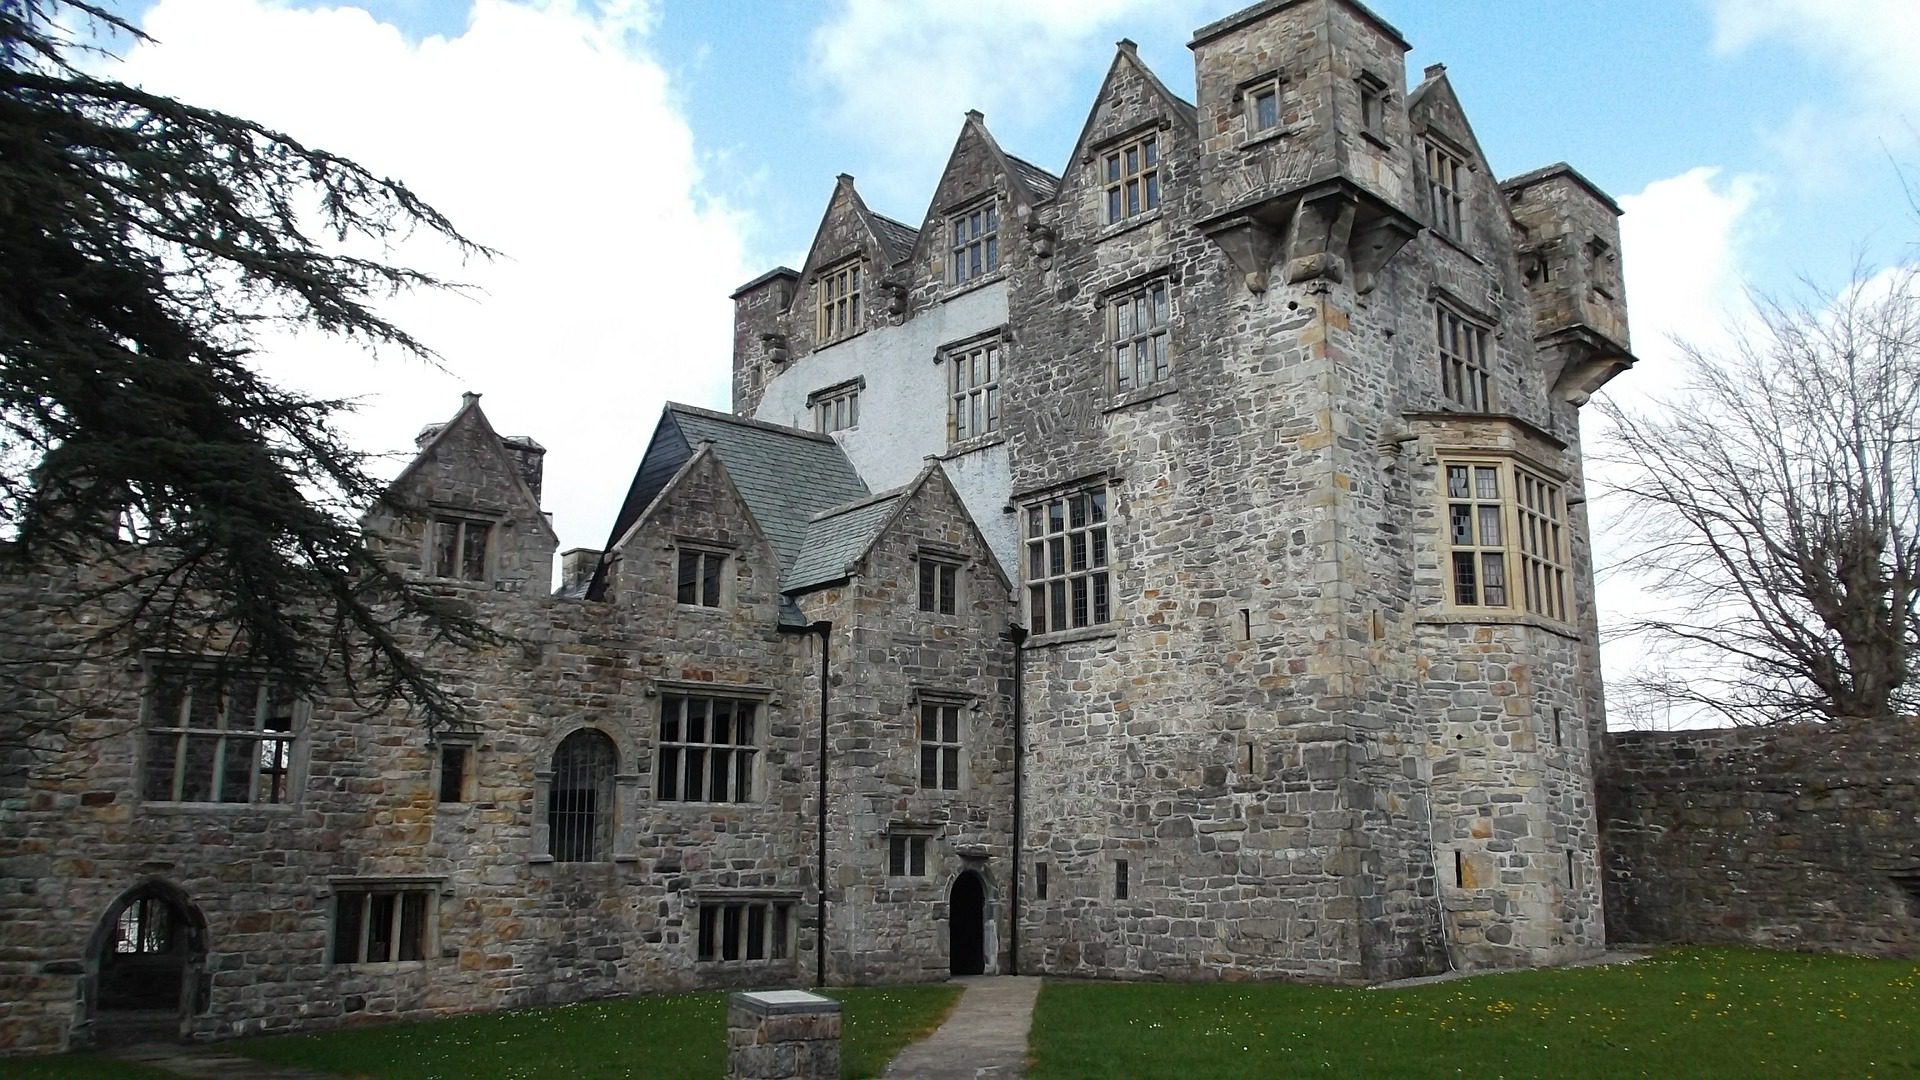 Donegal Castle, Donegal, Ireland